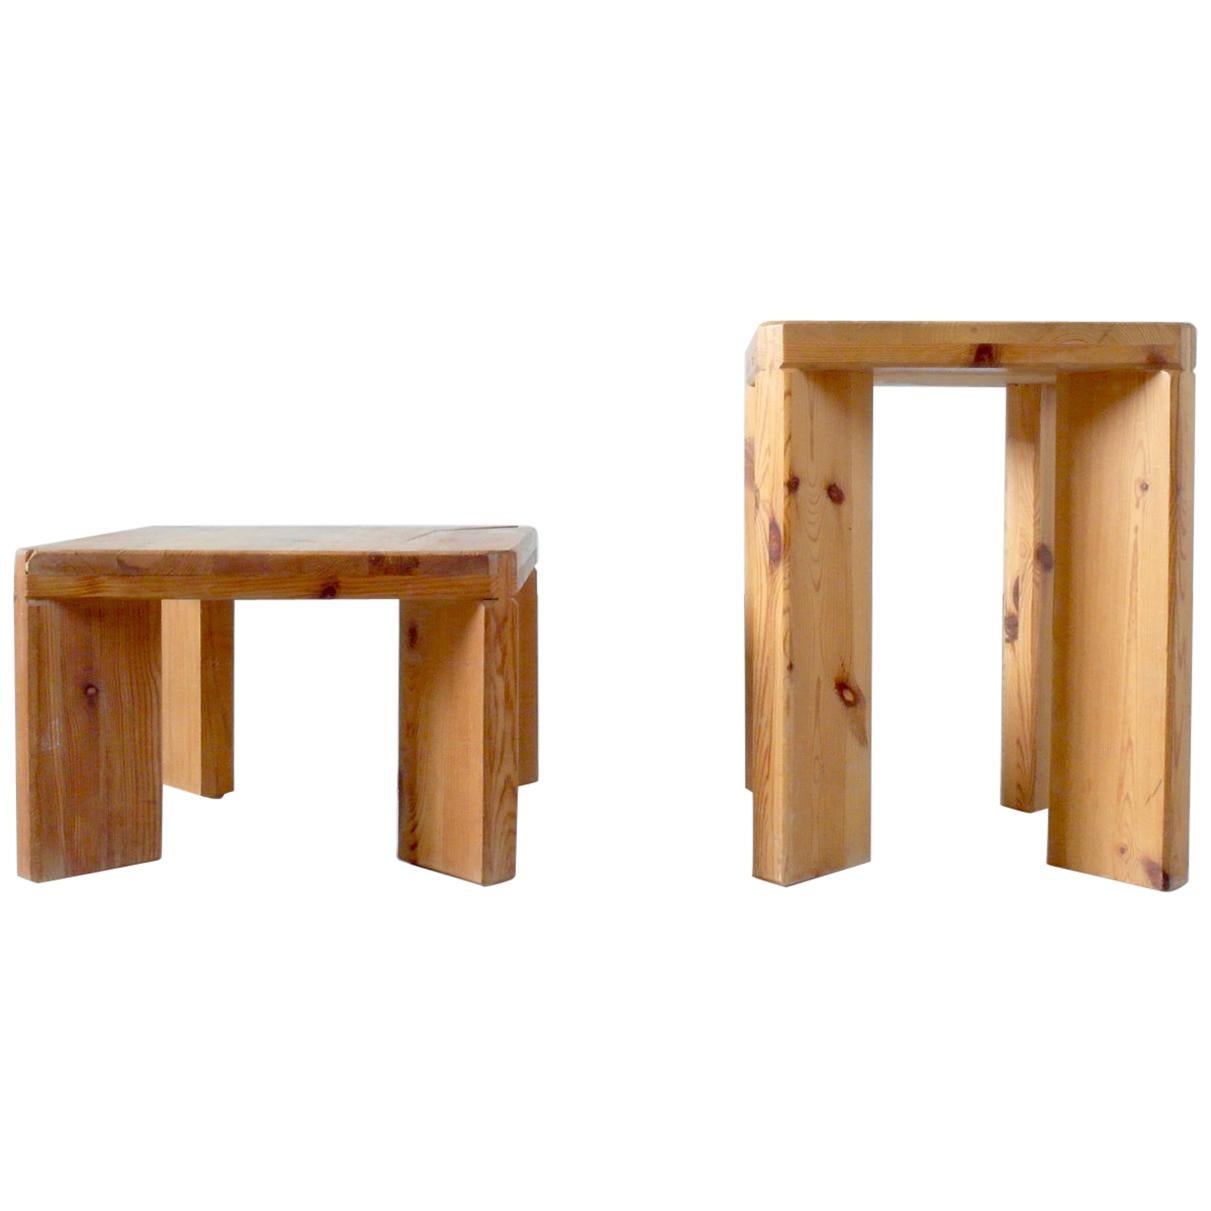 Roland Wilhelmsson, Unique Pair of Signed Stools, Studio of Artist 1965 and 1970 For Sale